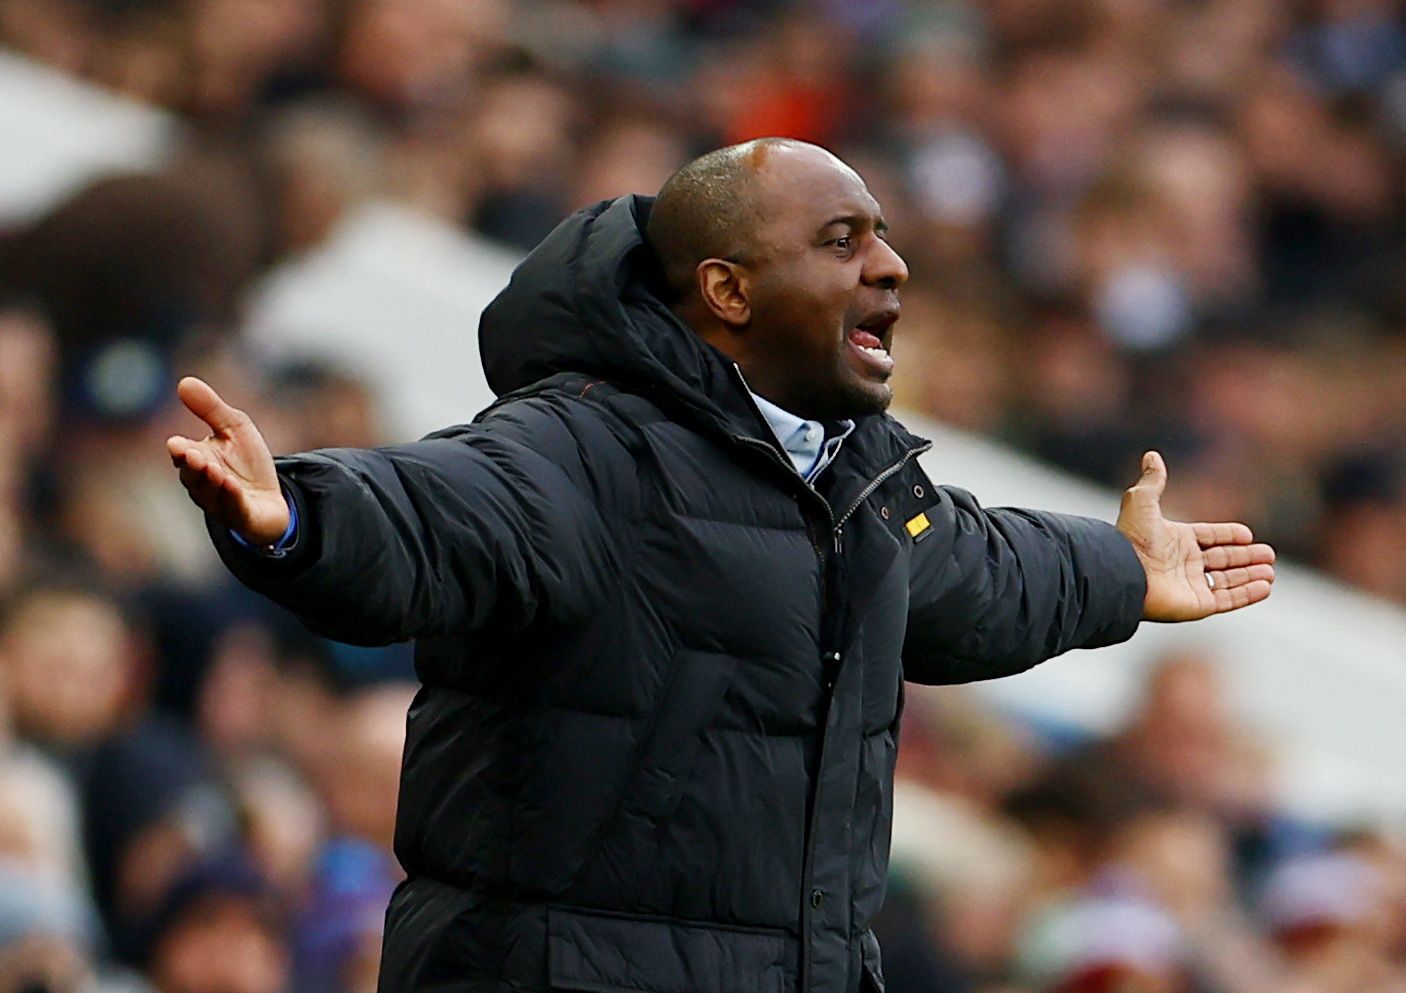 Crystal Palace manager Patrick Vieira animated on touchline during Aston Villa game